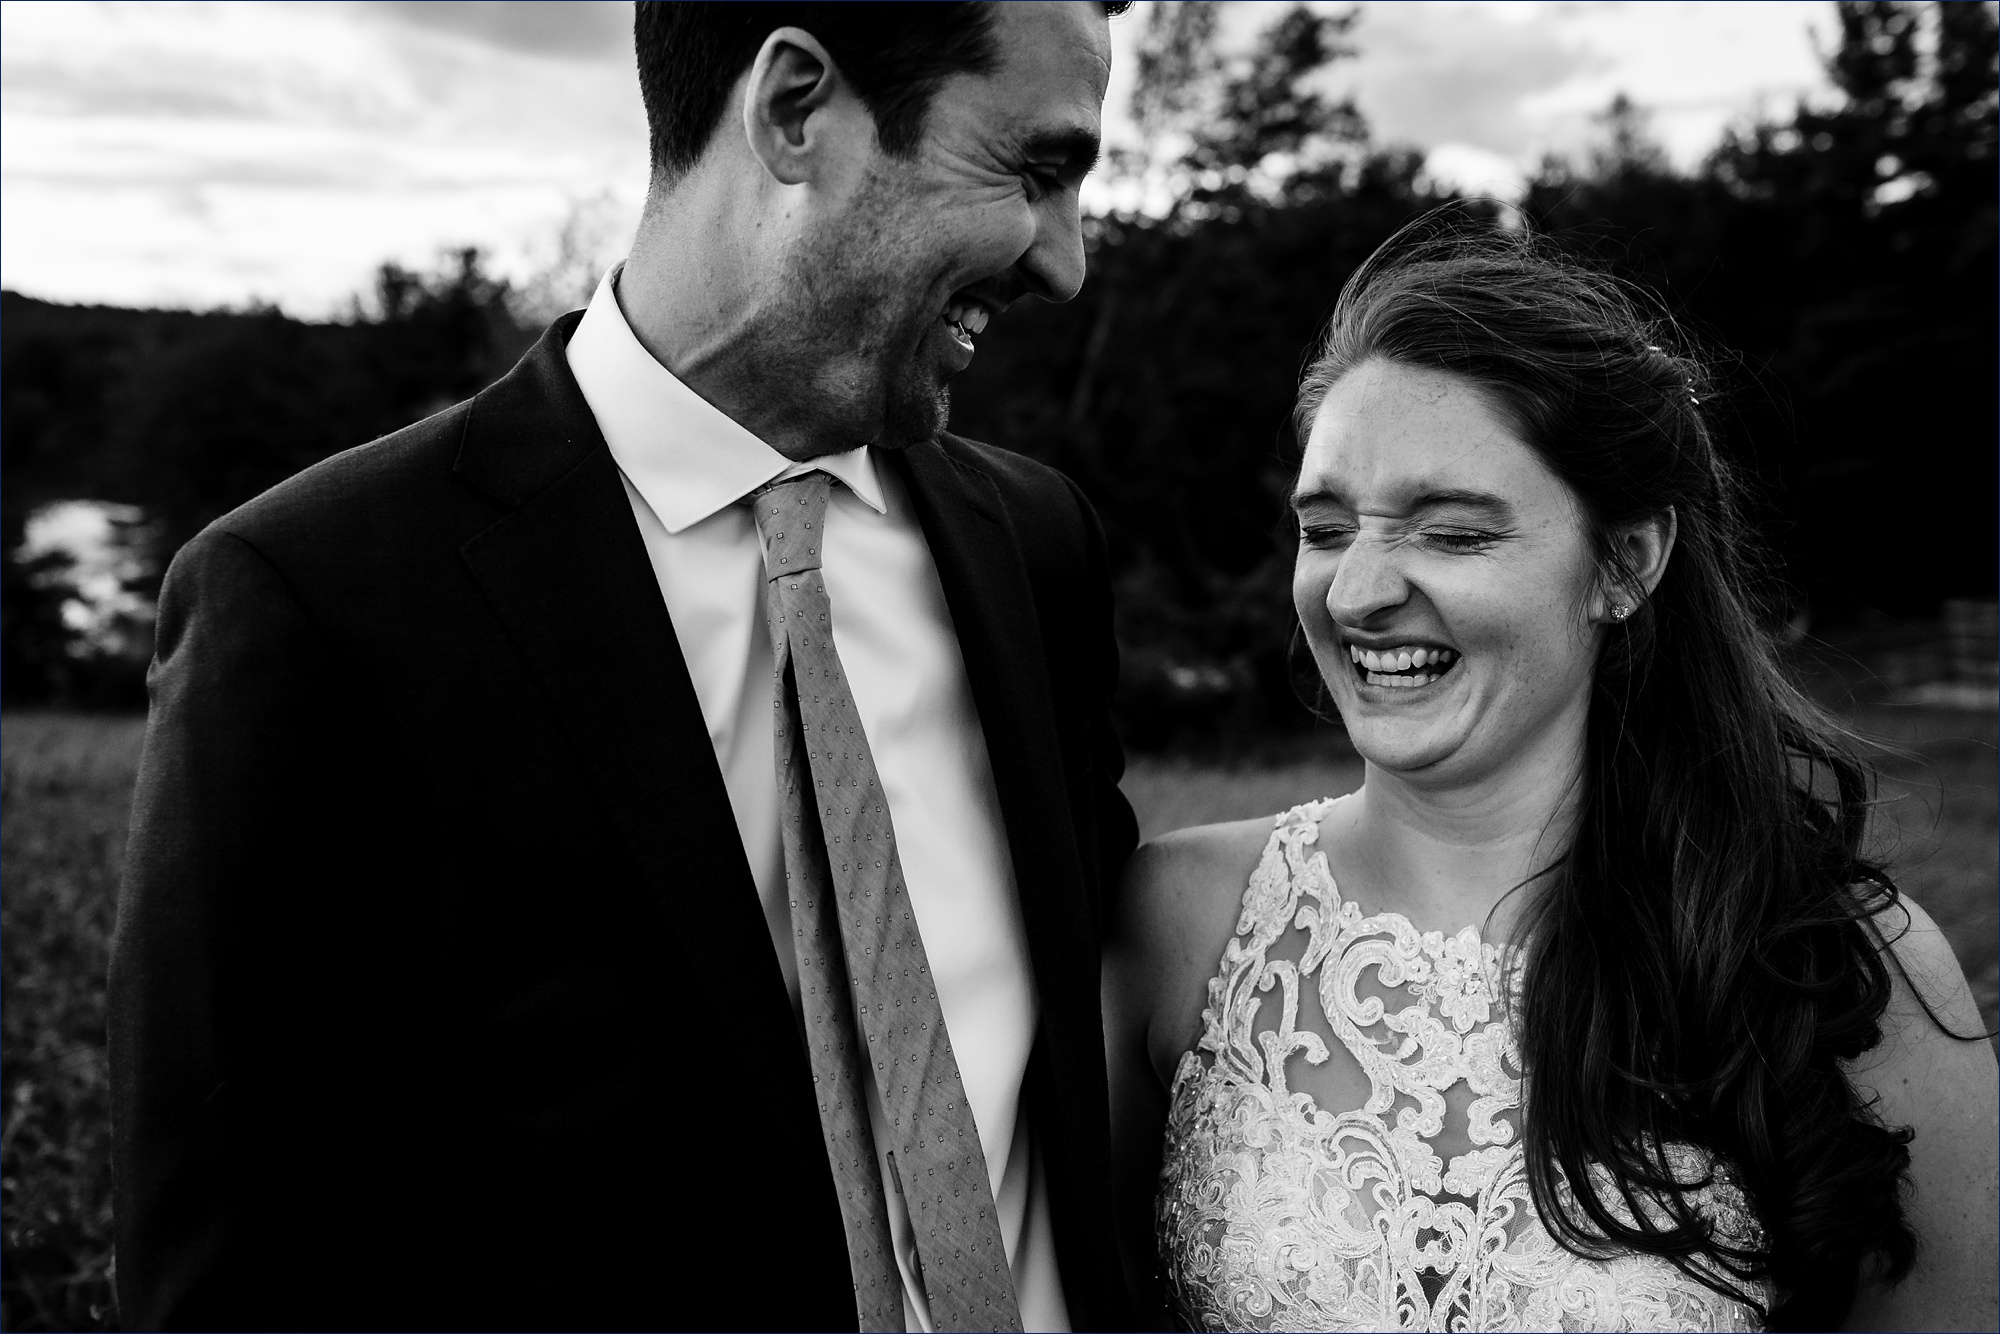 The bride cracks up at a joke from the groom in the golden hour at their NH wedding day